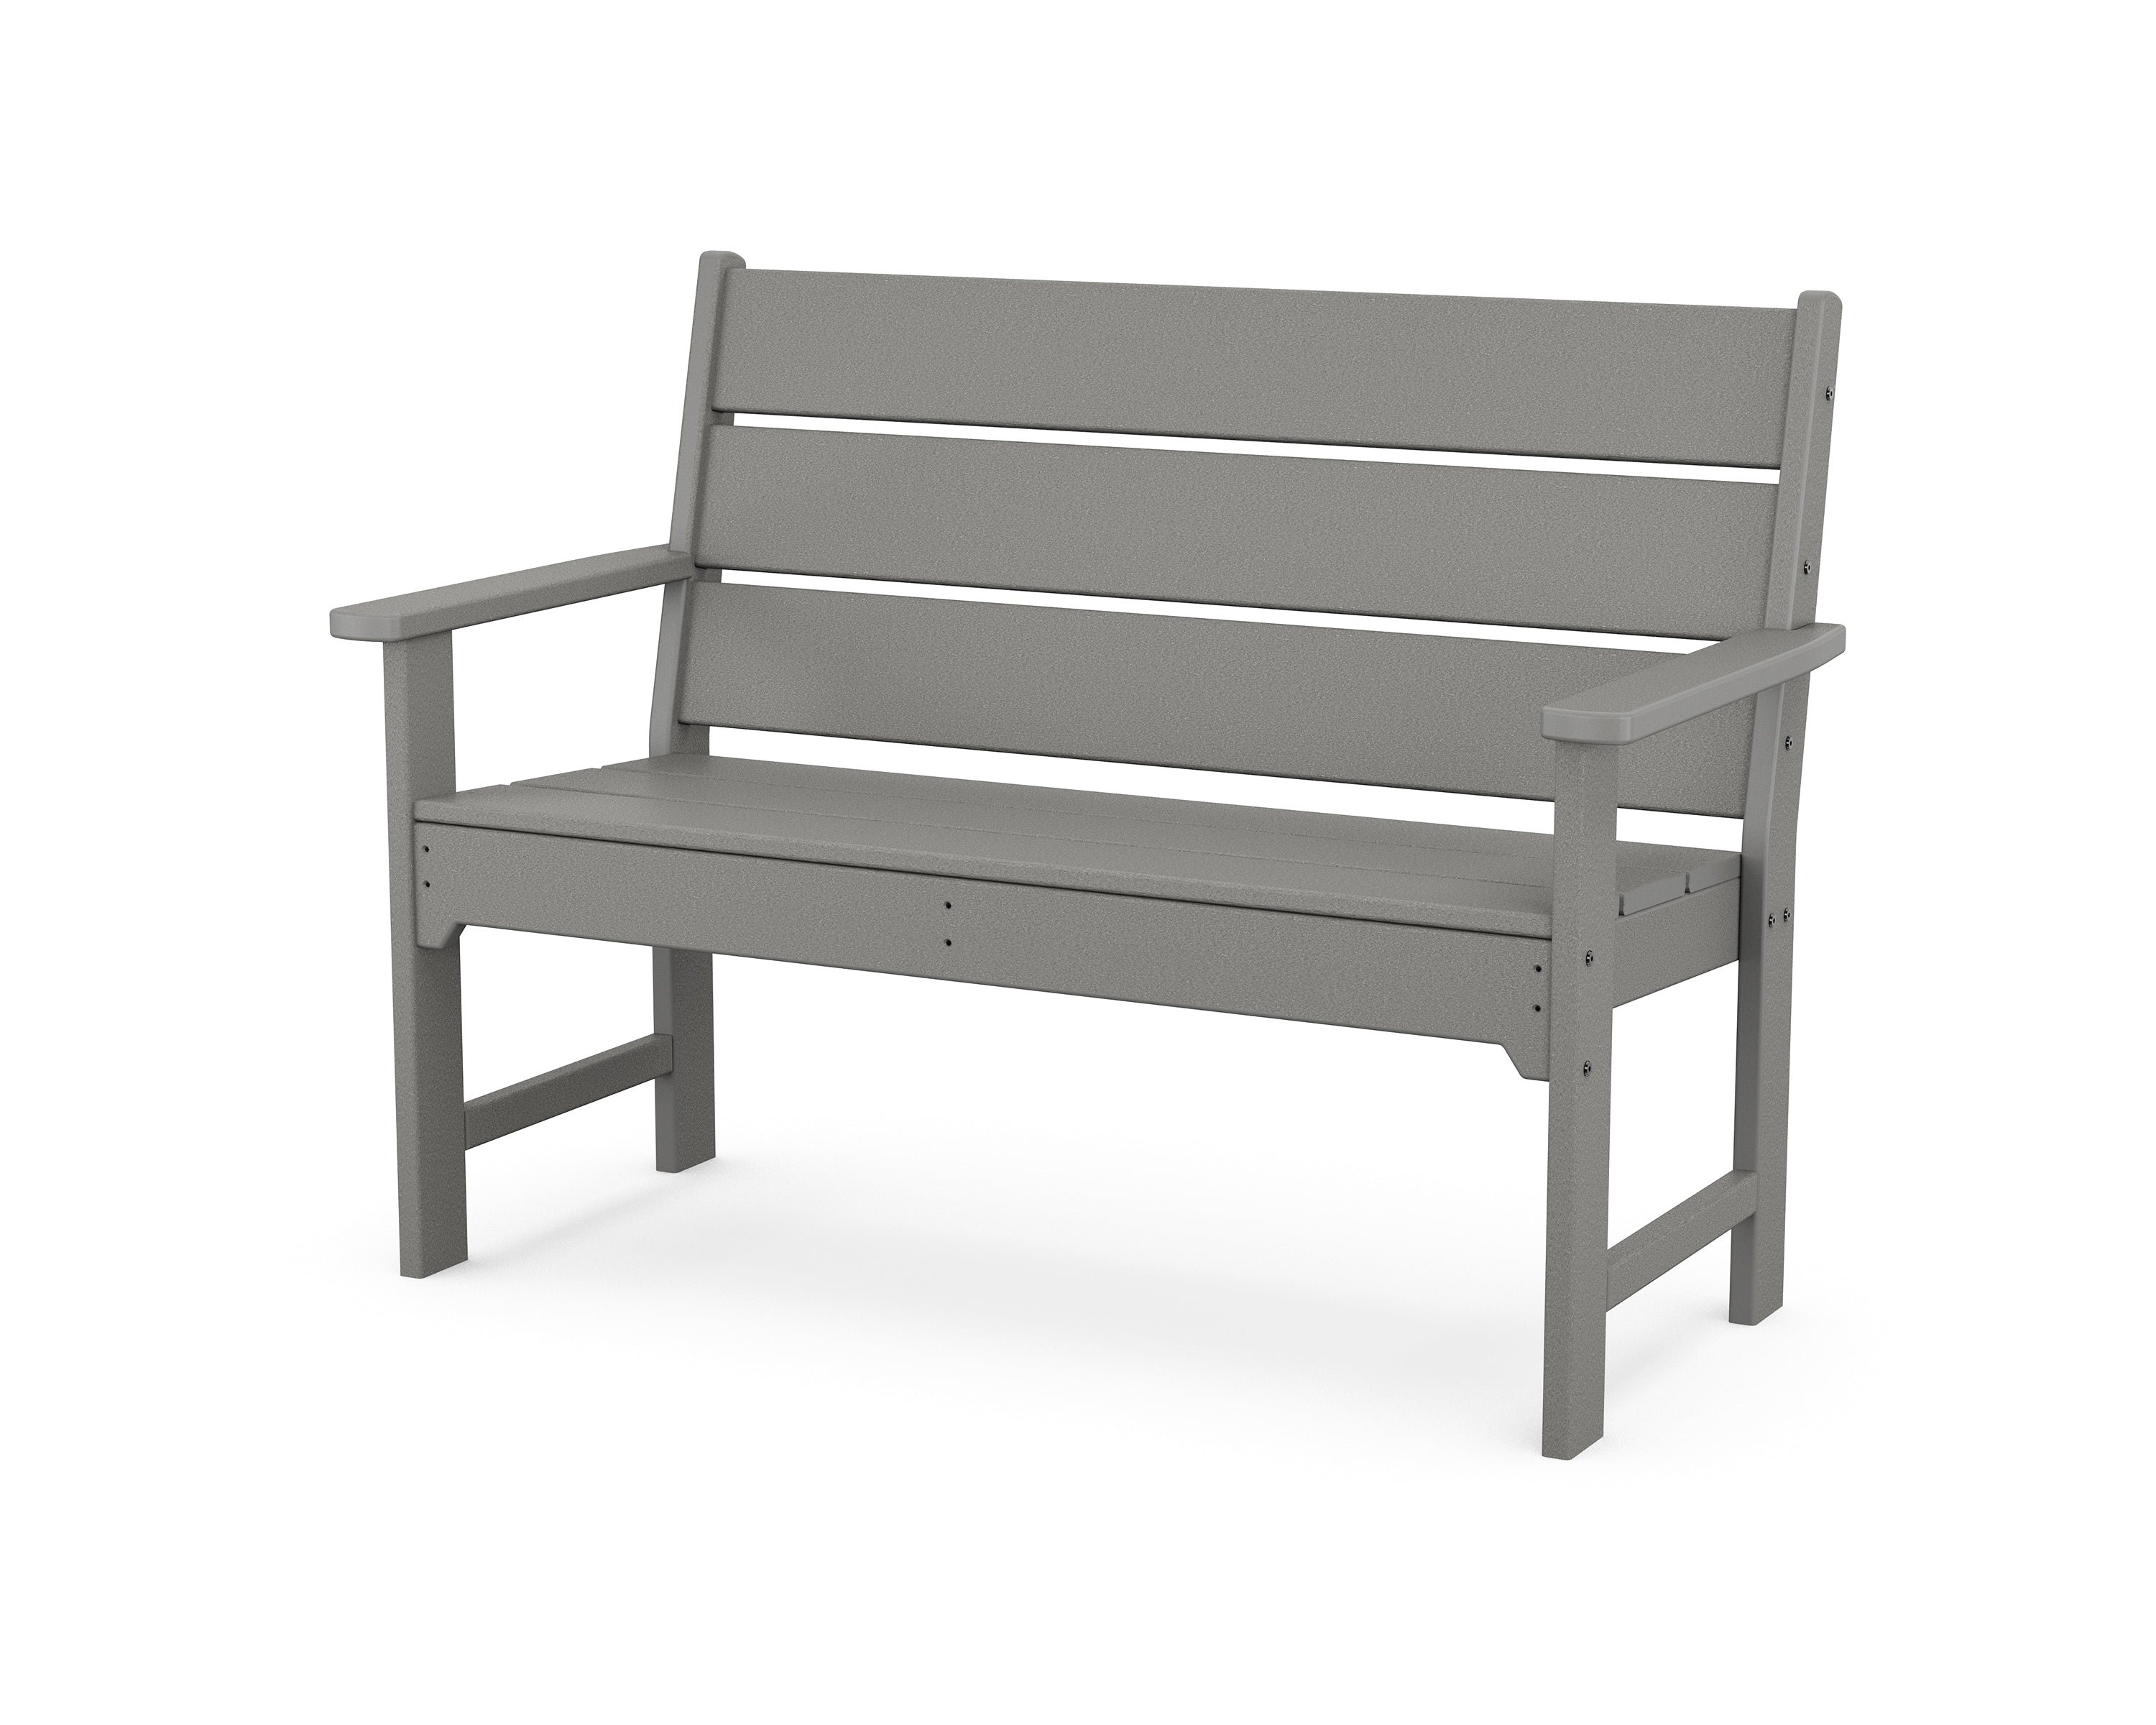 POLYWOOD® Lakeside 48" Bench in Slate Grey